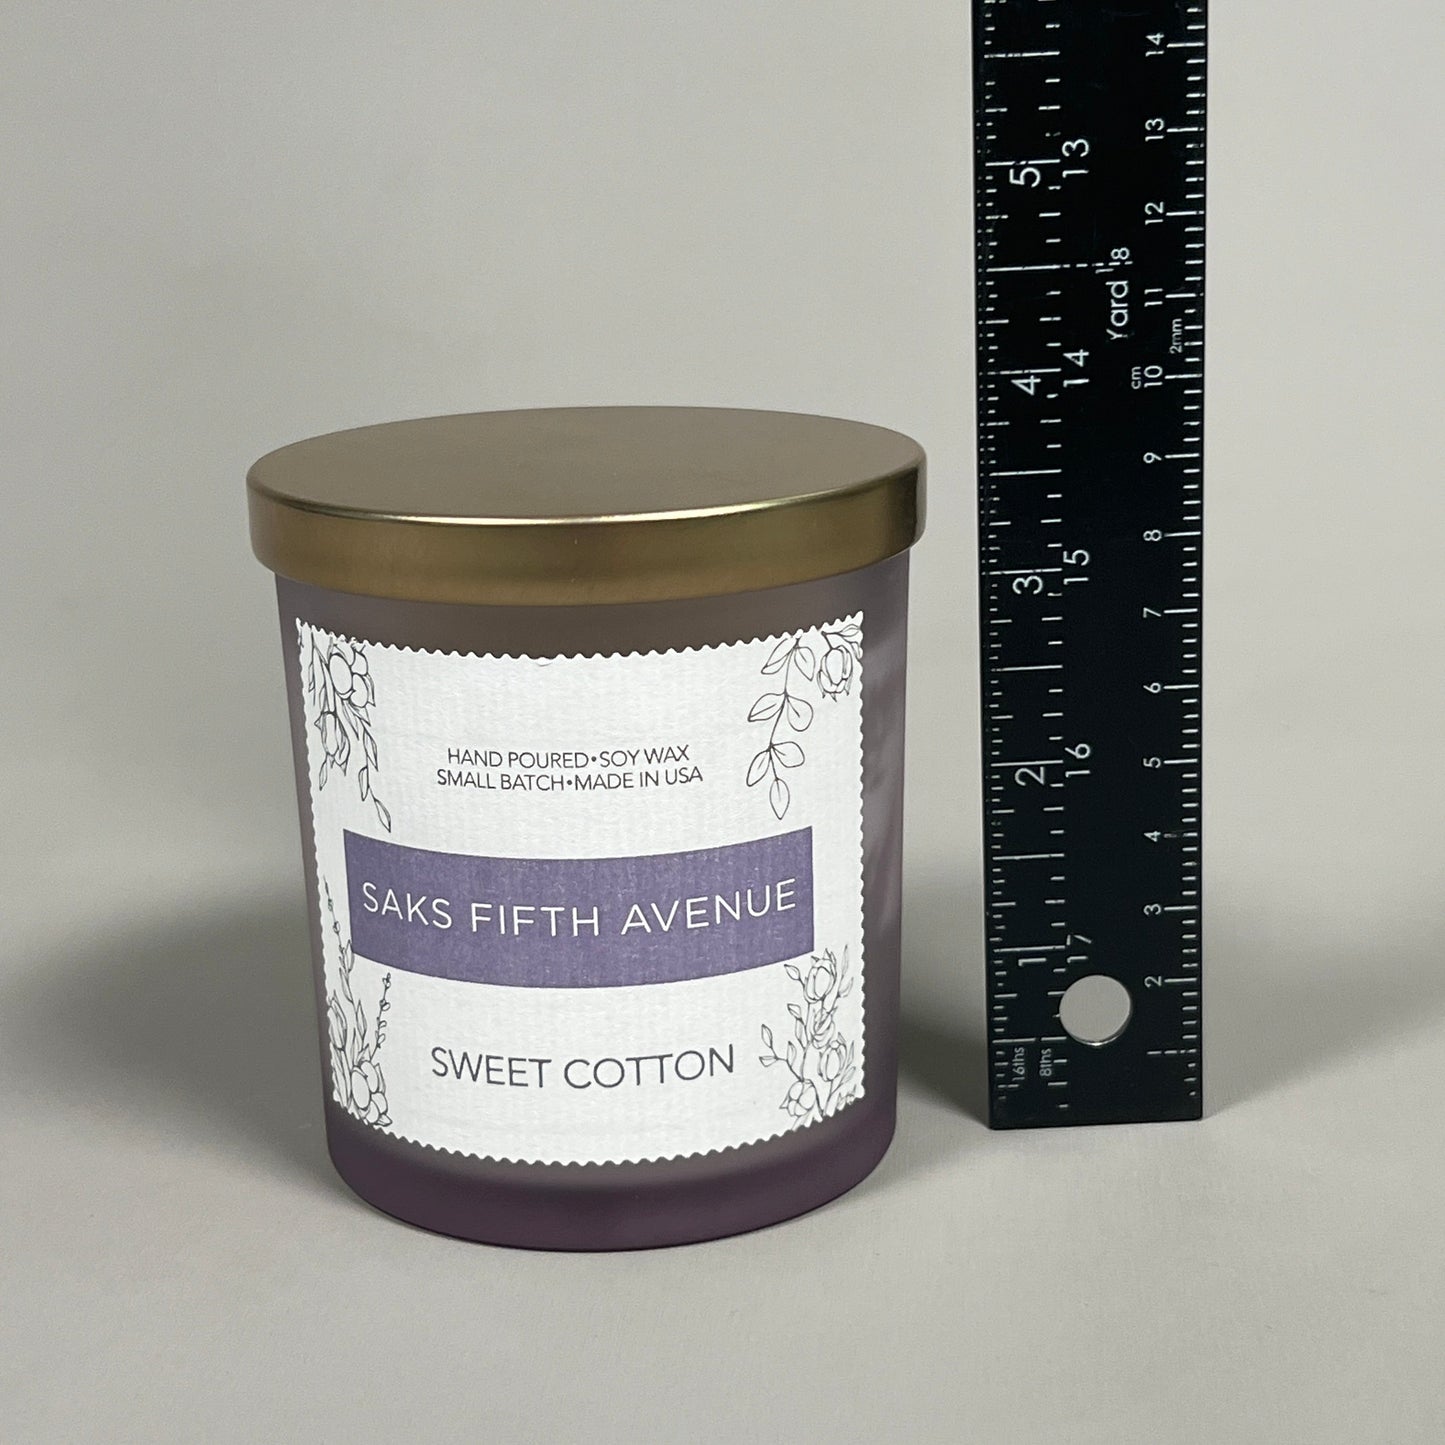 SAKS FIFTH AVENUE Sweet Cotton Hand Poured Soy Wax Candle 8 fl oz LOT OF 4! (New)